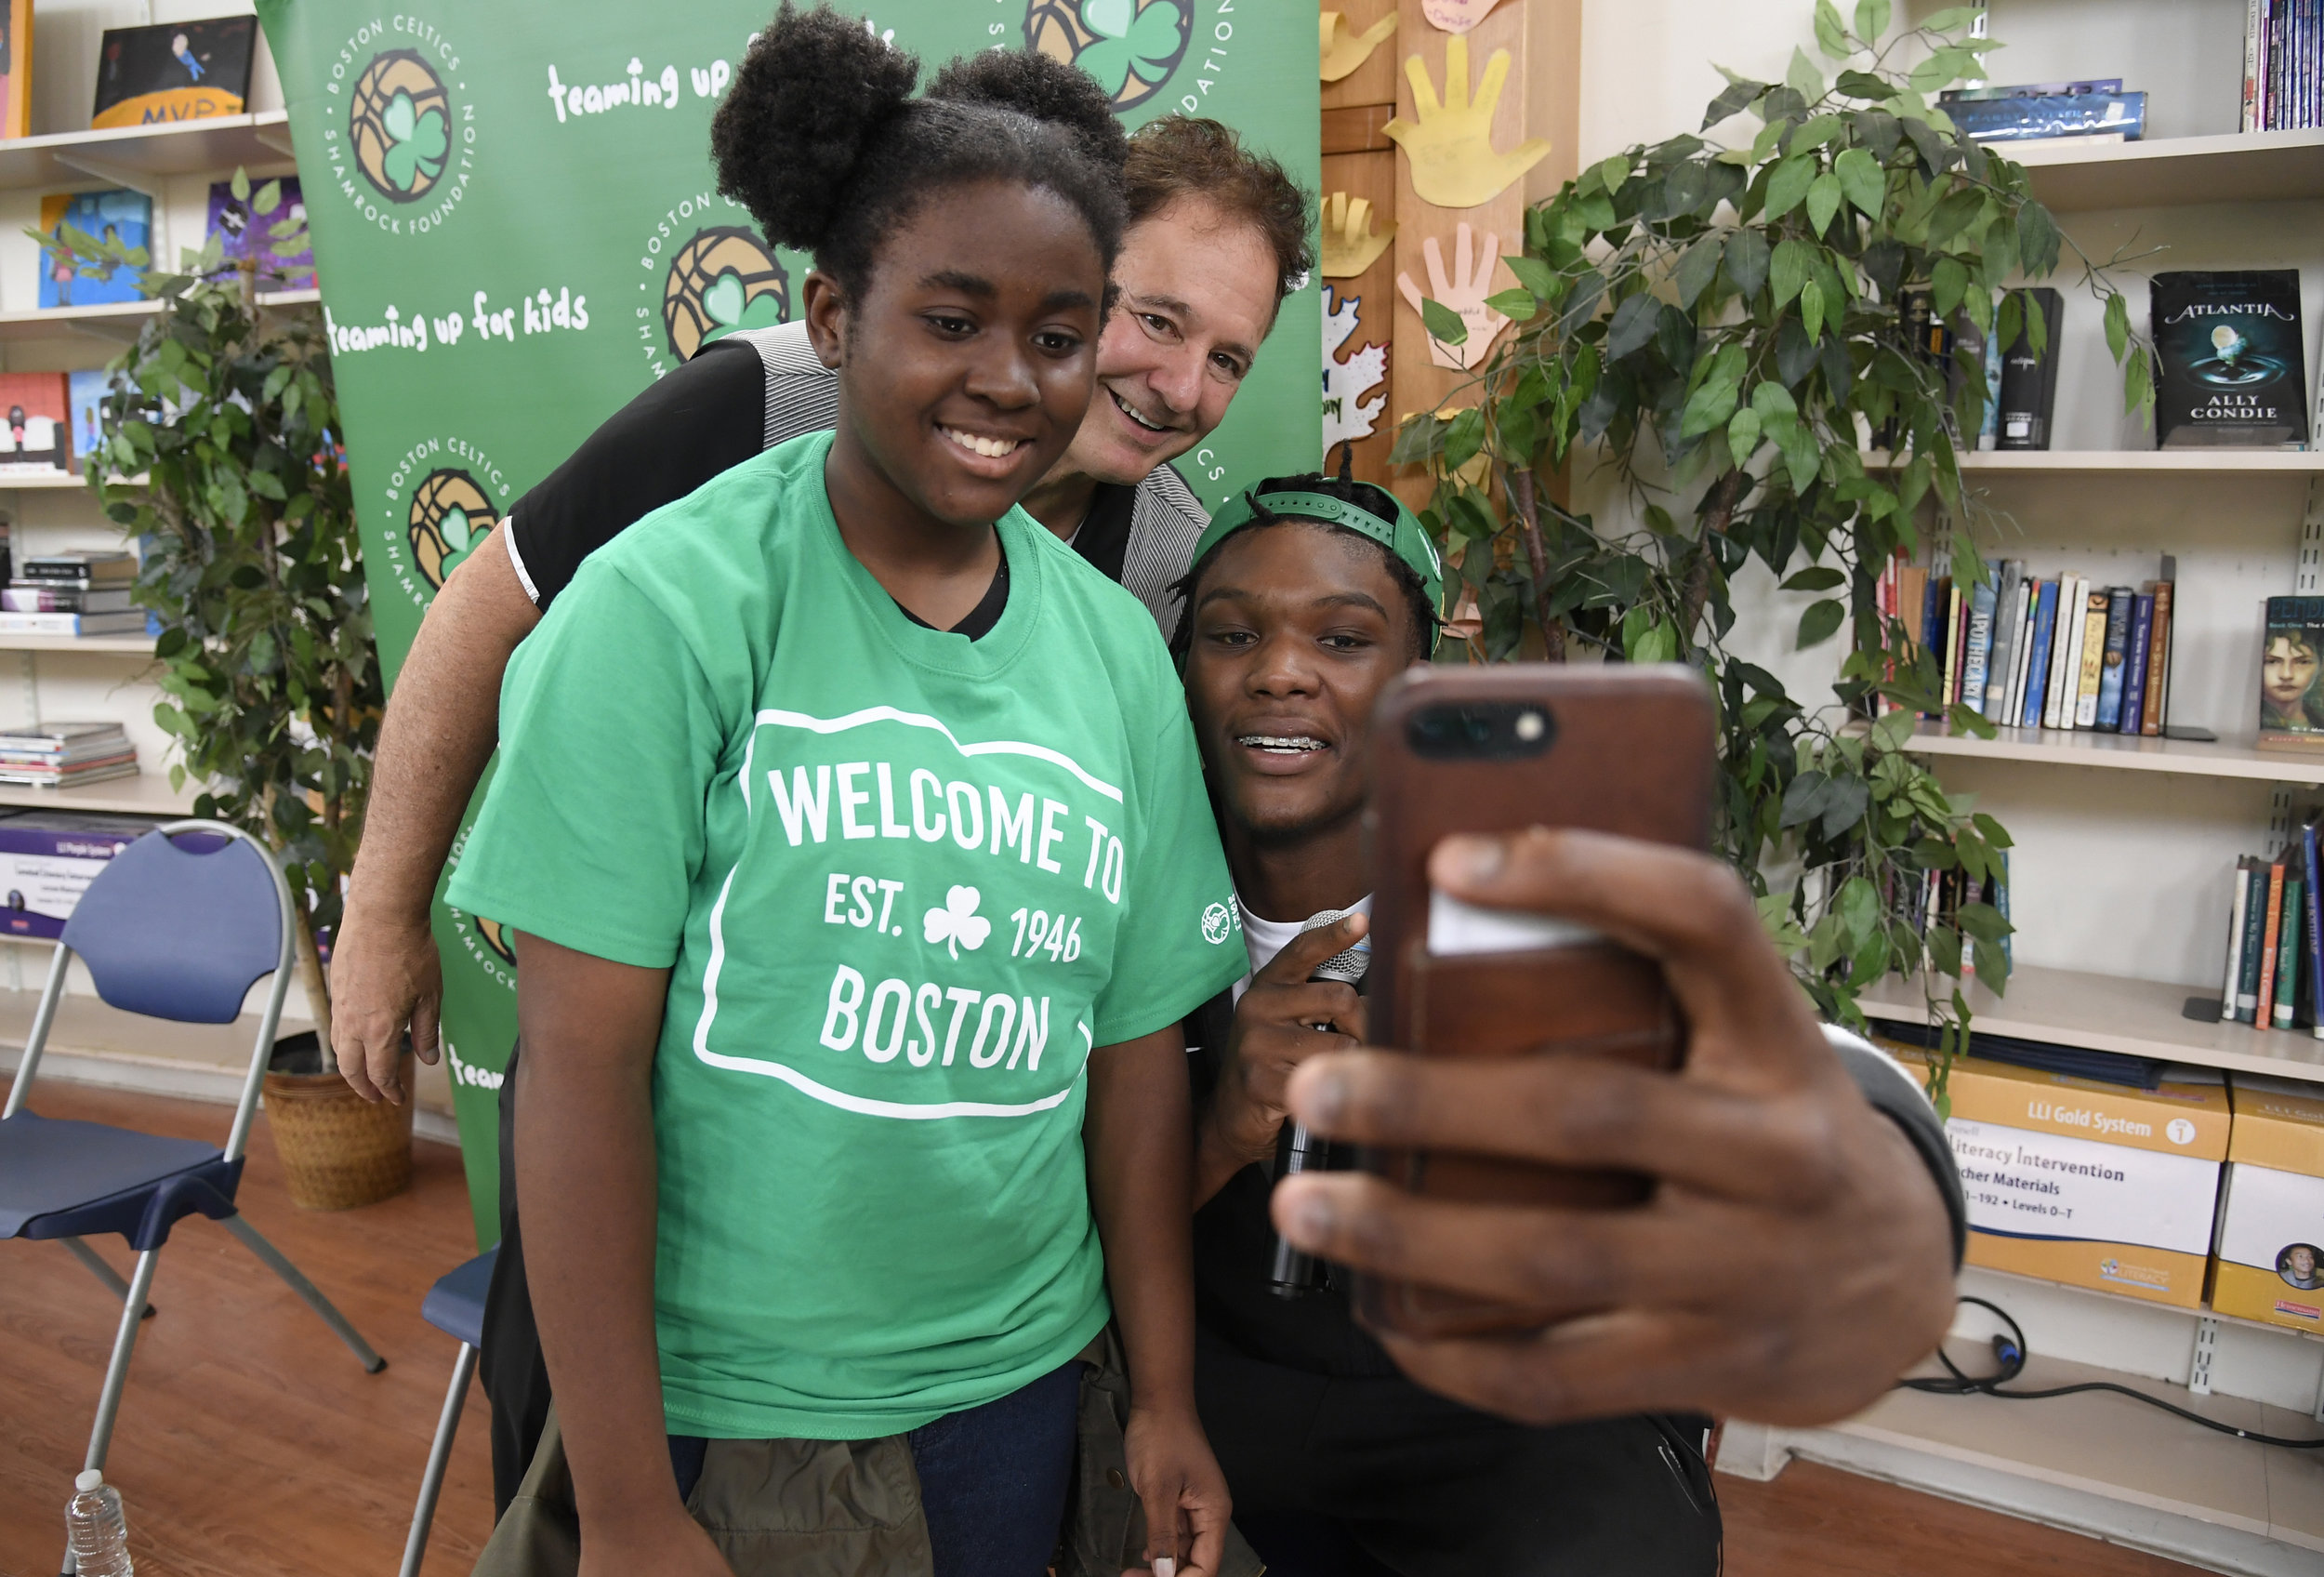   Robert Williams, the 2018 Celtics Rookie, taking a selfie with Ashanti and Stephen Pagliuca  